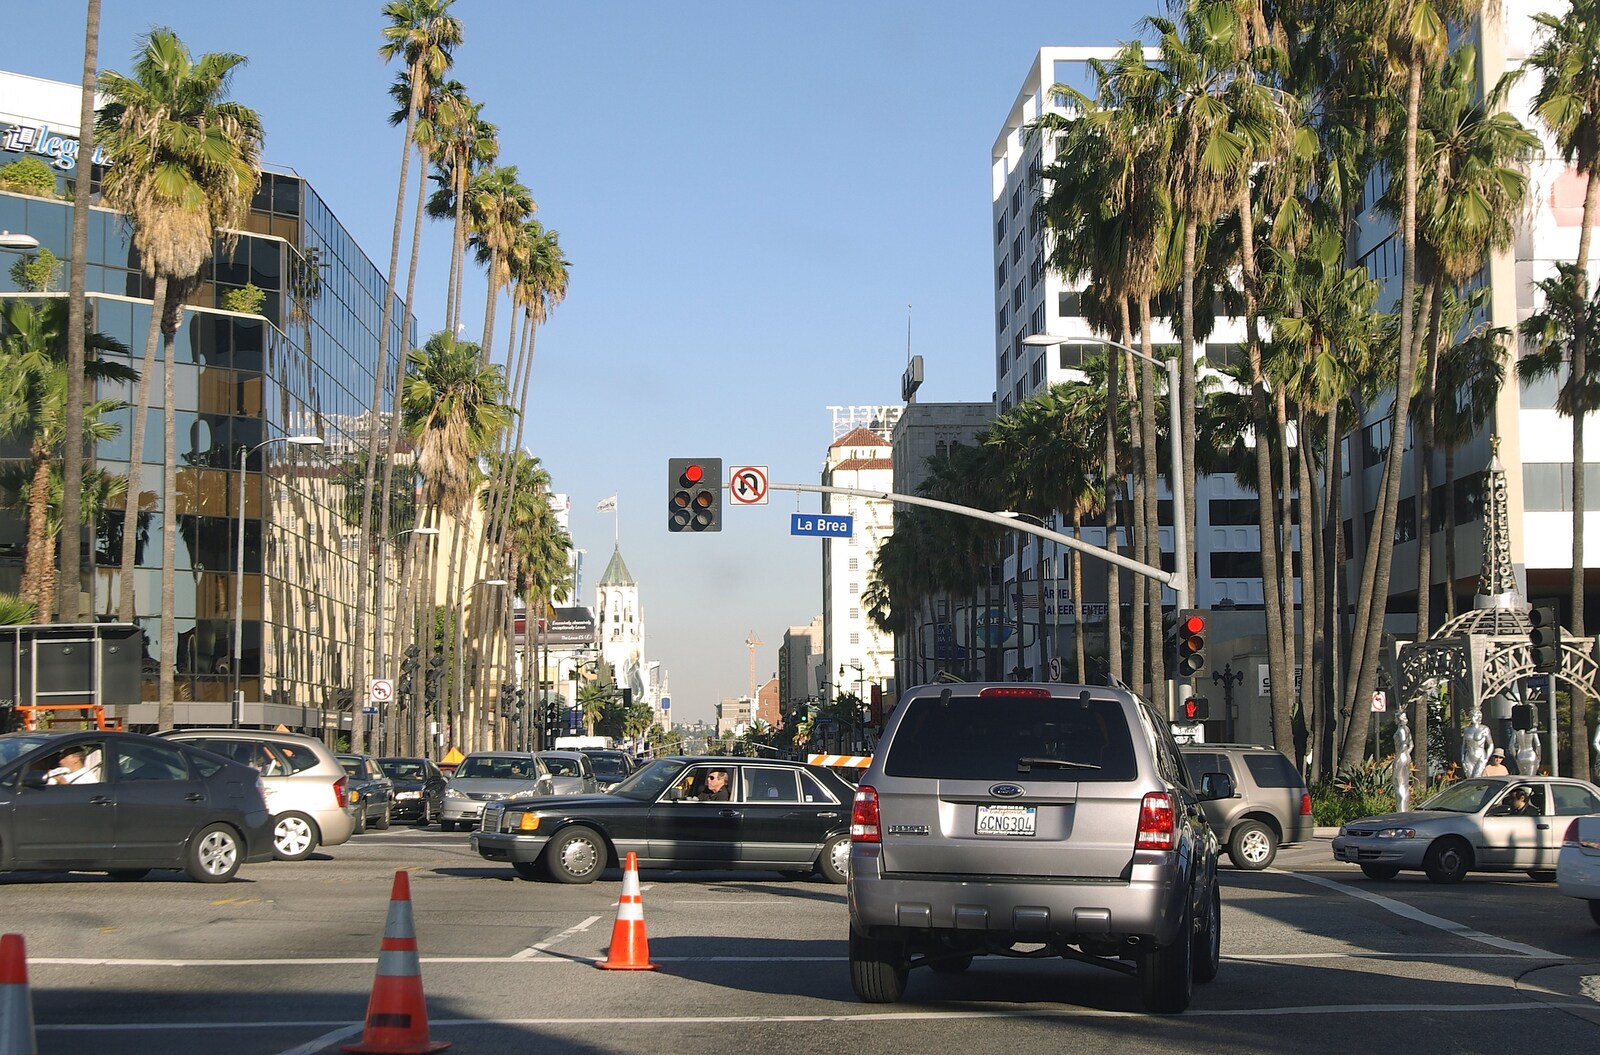 San Diego and Hollywood, California, US - 3rd March 2008: Intersection of Hollywood Boulevard and La Brea